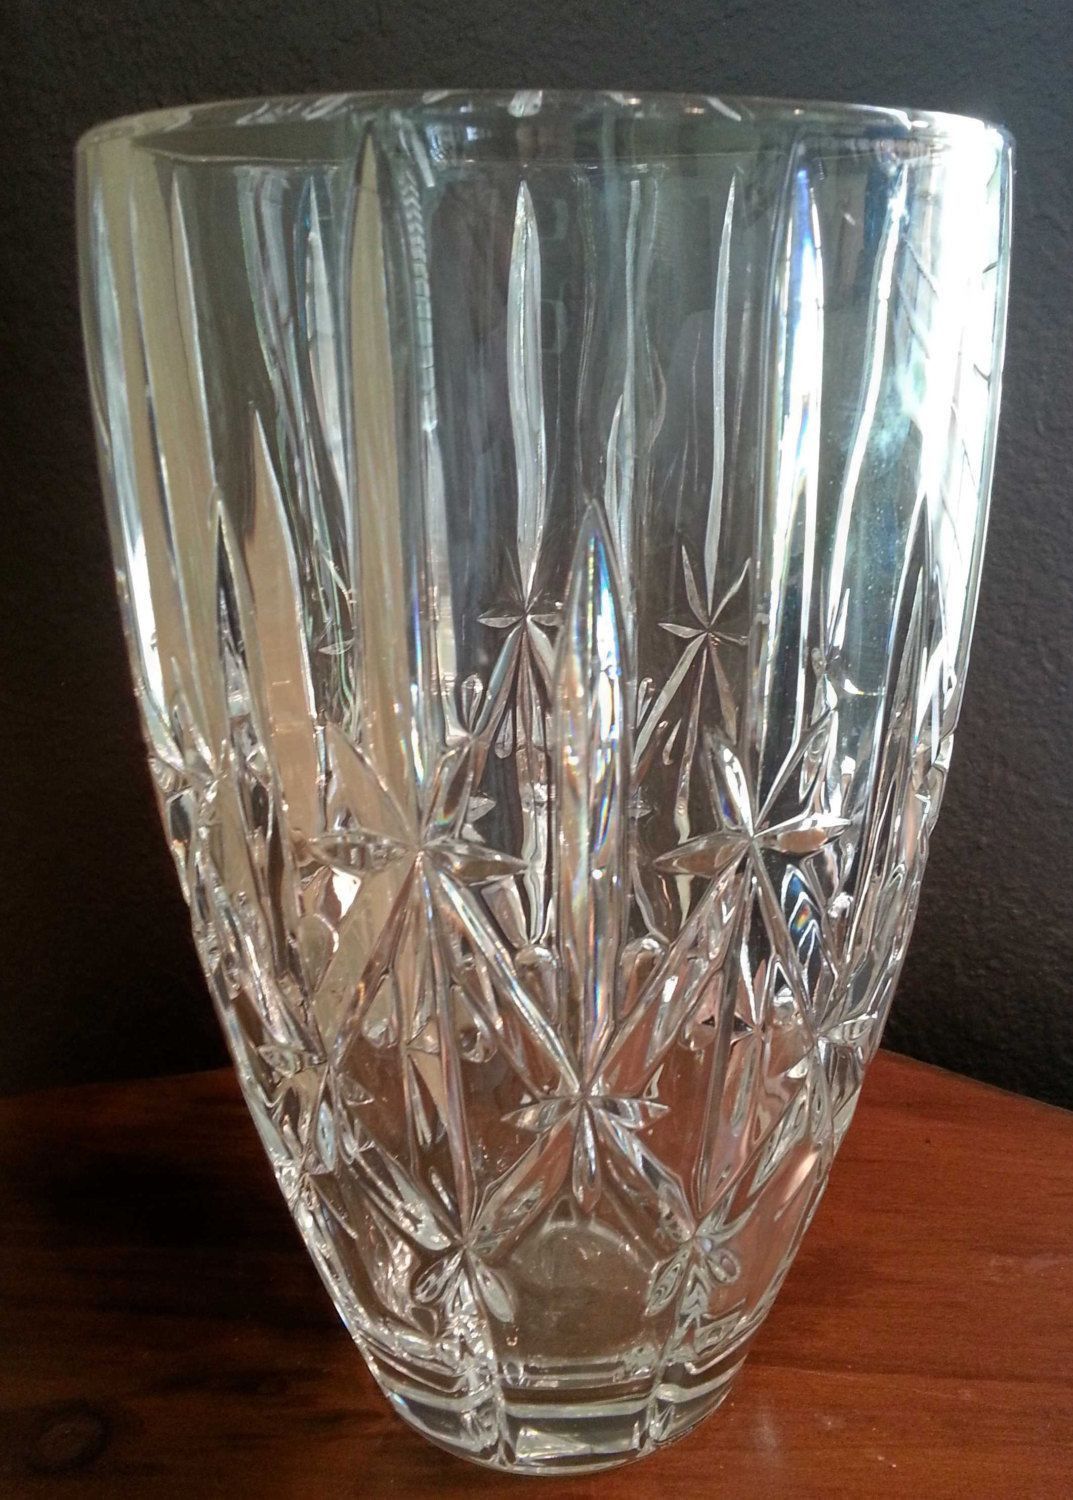 21 Awesome Waterford Blue Vase 2024 free download waterford blue vase of waterford crystal vases pics marquis by waterford sparkle 9 inch in waterford crystal vases pics marquis by waterford sparkle 9 inch vase crystal vase of waterford cry